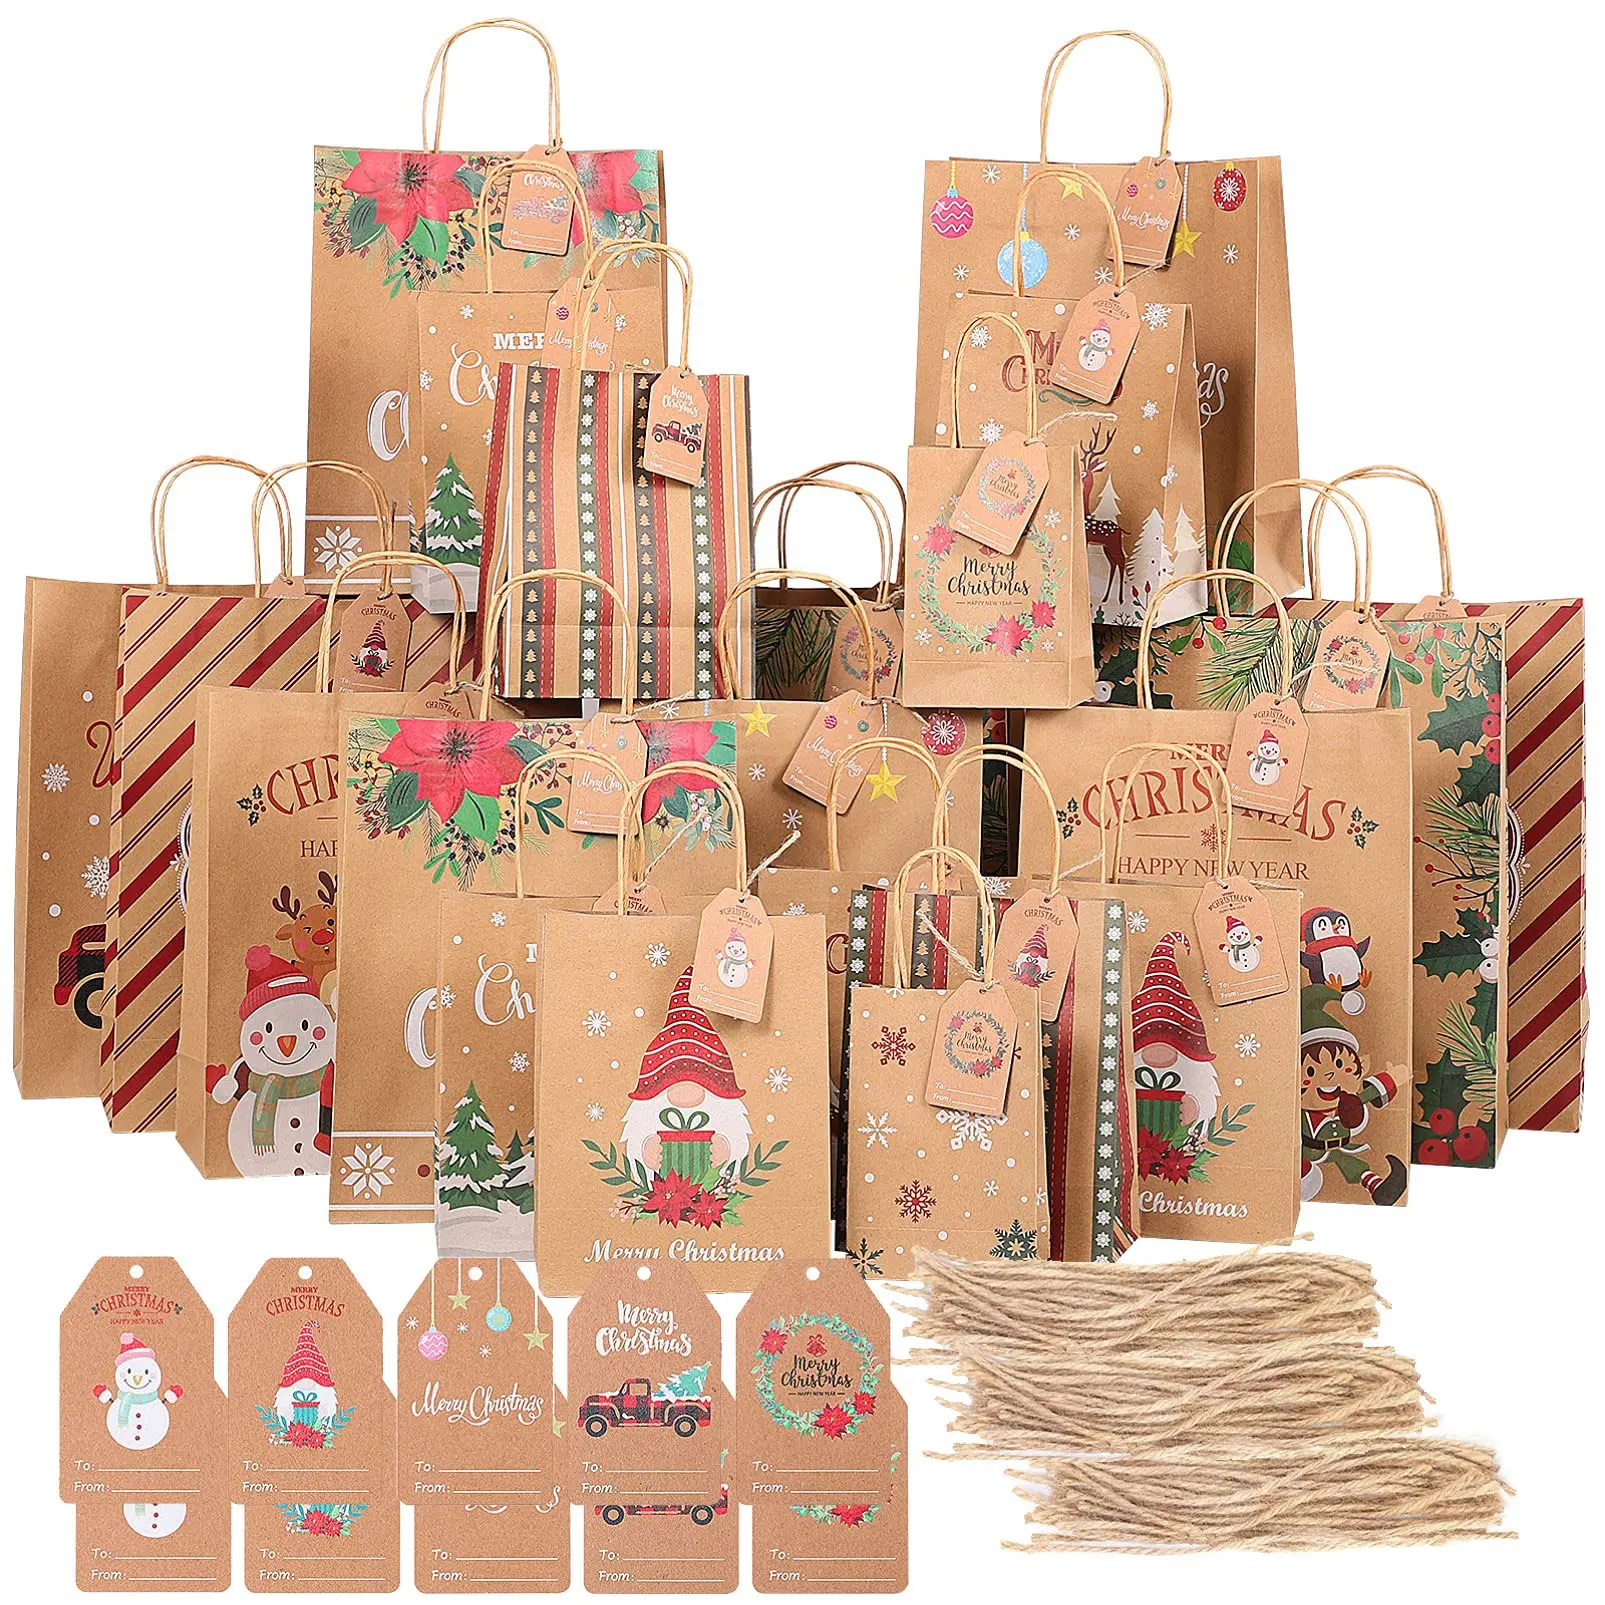 Custom Elegant Recyclable Printed Craft Various Sizes Brown Christmas Wrapping Paper Decorative Bags For Gift Xmas Party Favors